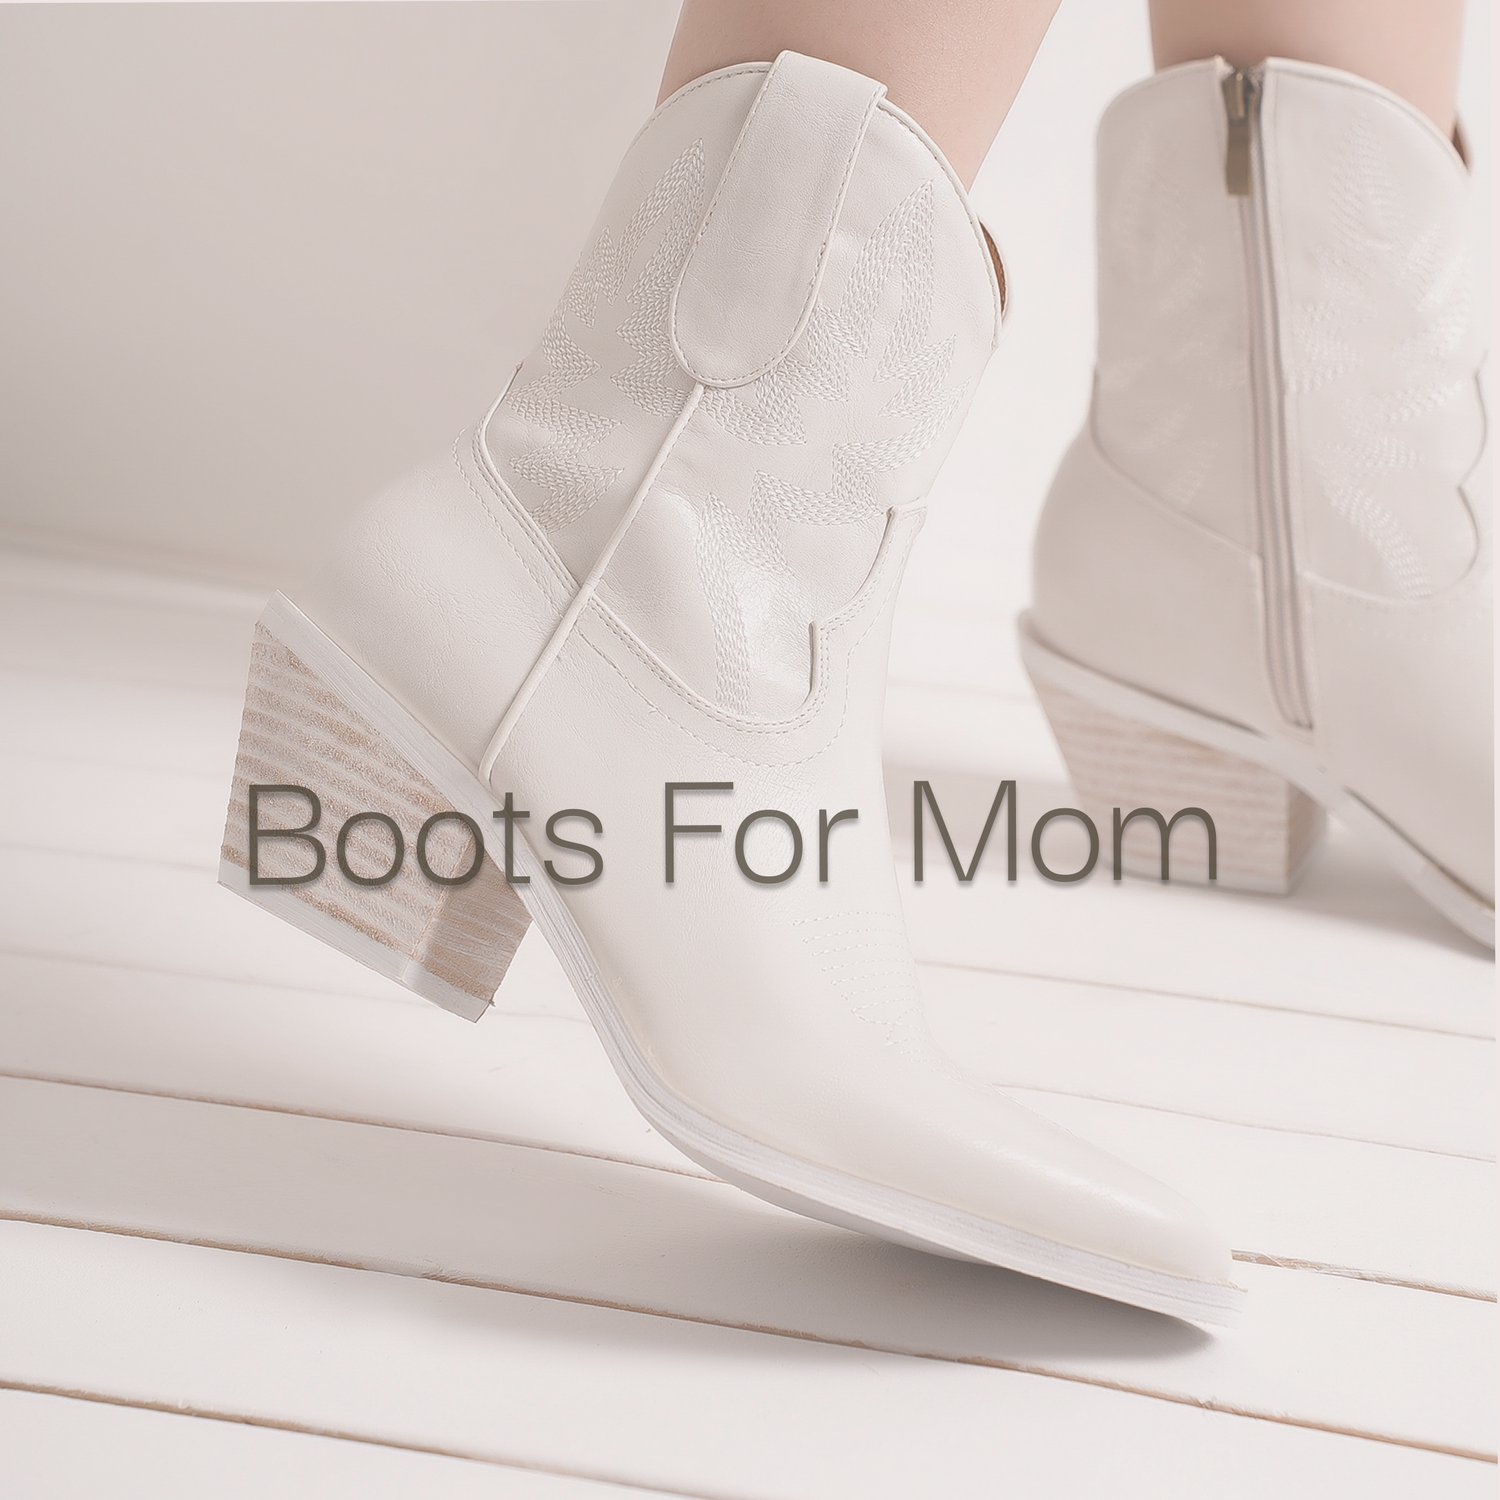 Boots For Mom